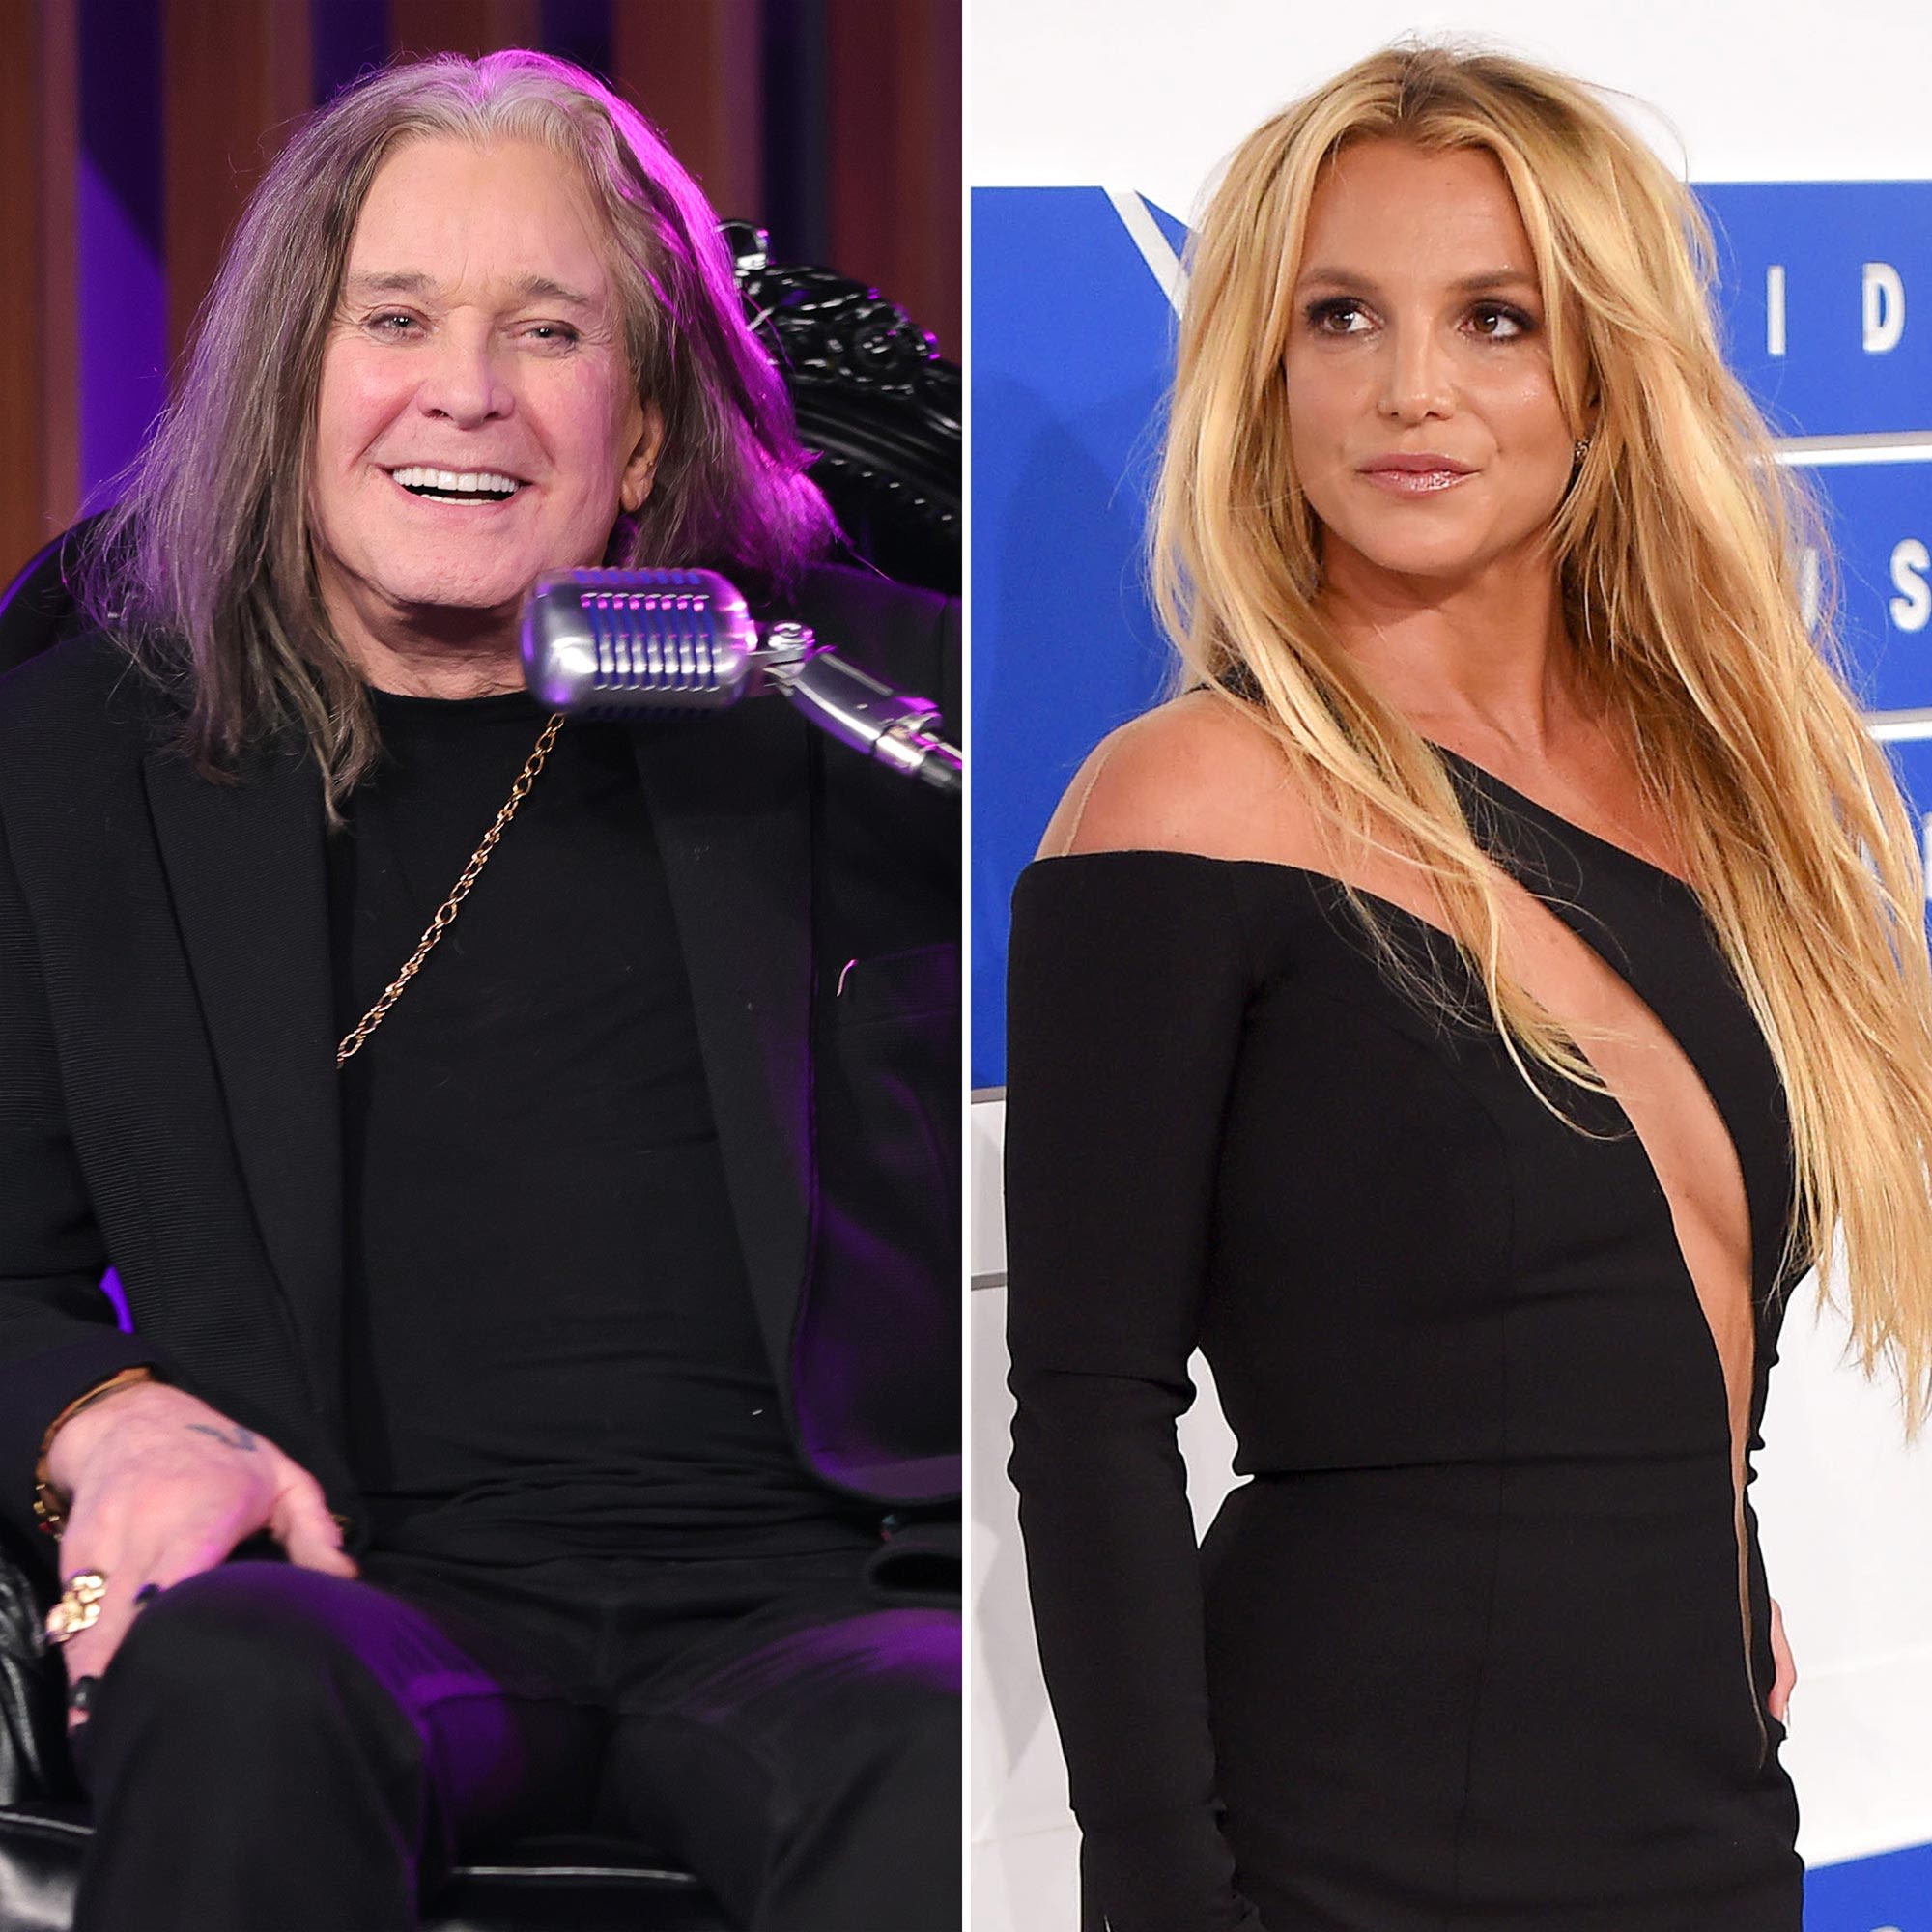 Ozzy Osbourne Apologizes to Britney Spears for Negative Comments About Her Viral Dancing Videos